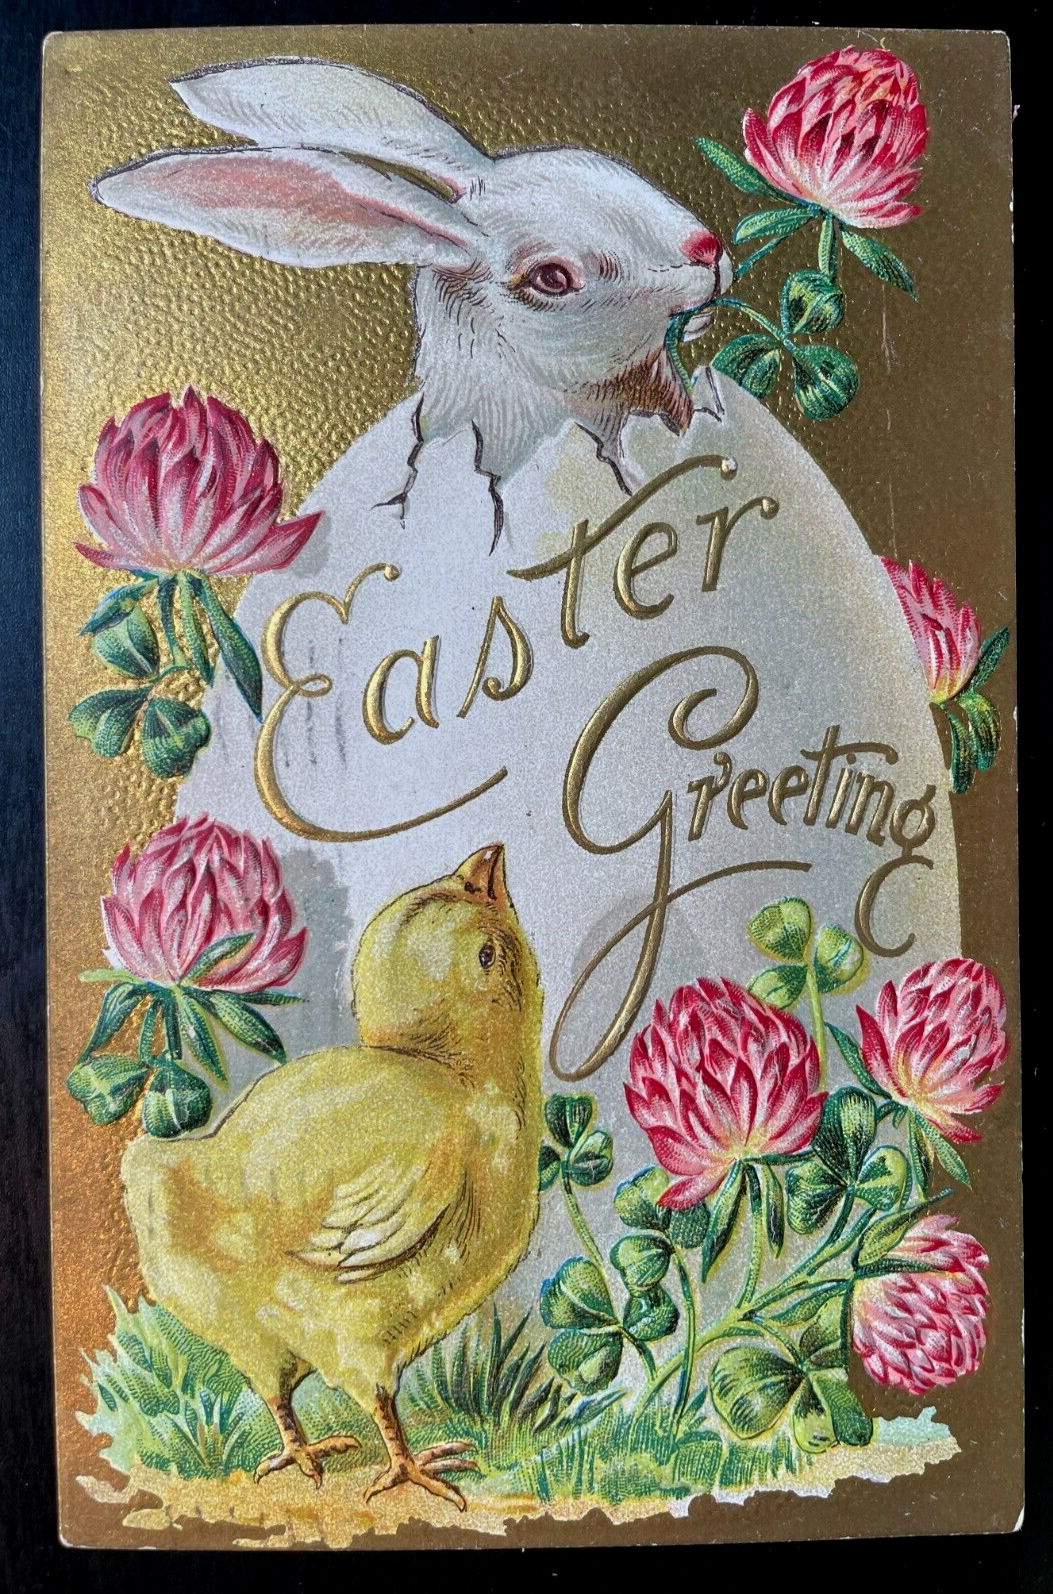 Vintage Victorian Postcard 1910 Easter Greetings - Big White Bunny with Clover